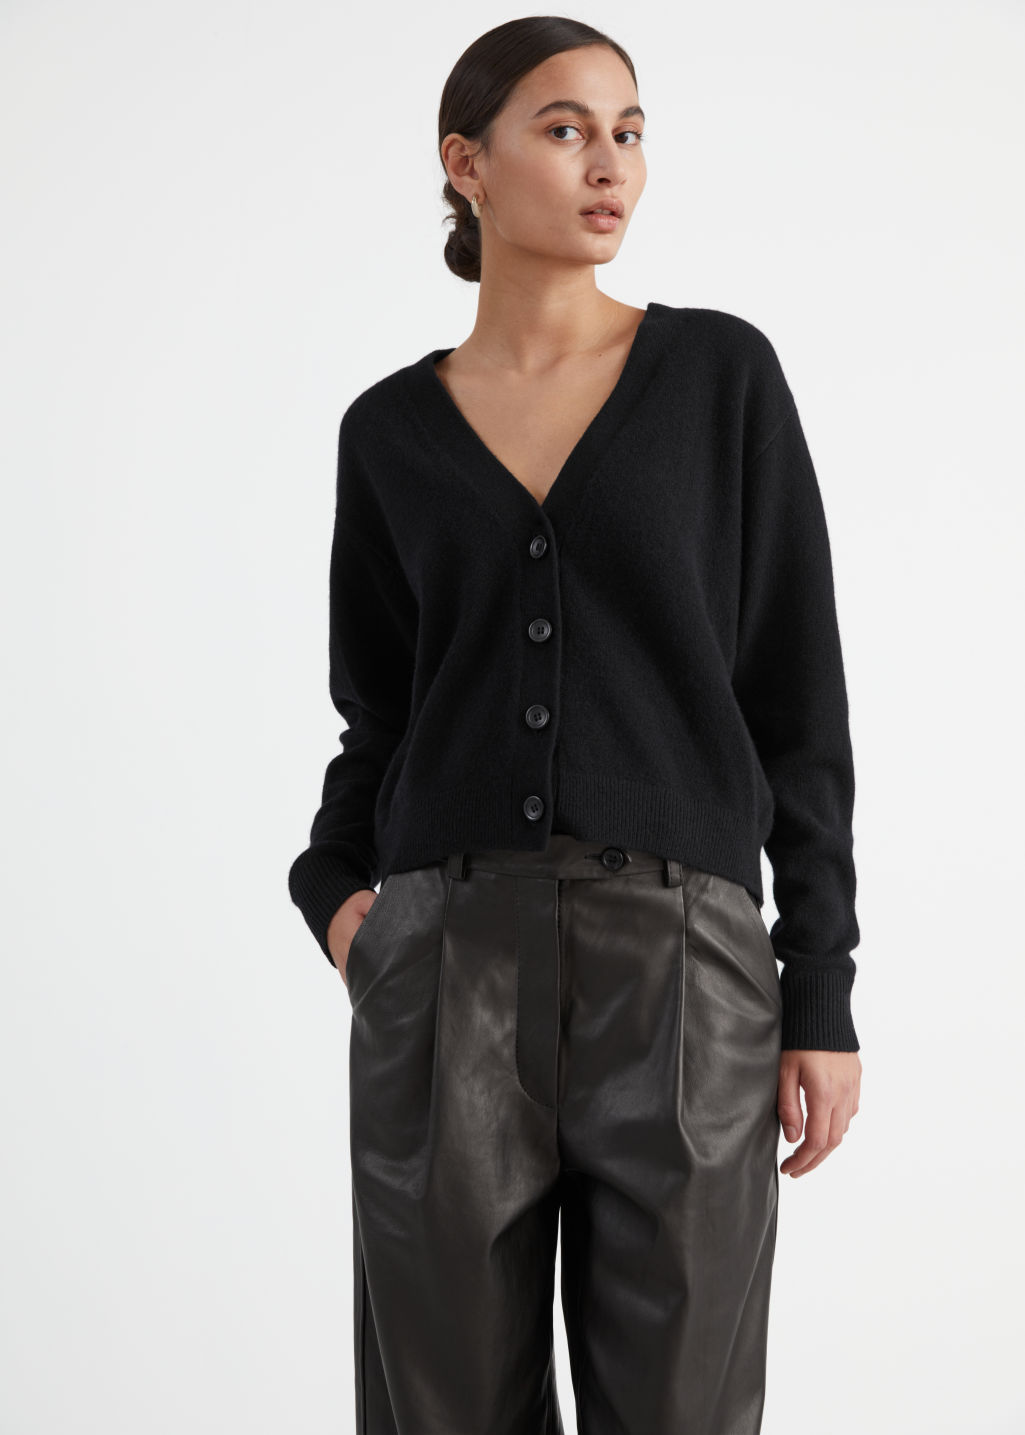 Relaxed Wool Knit Cardigan - Black - Cardigans - & Other Stories